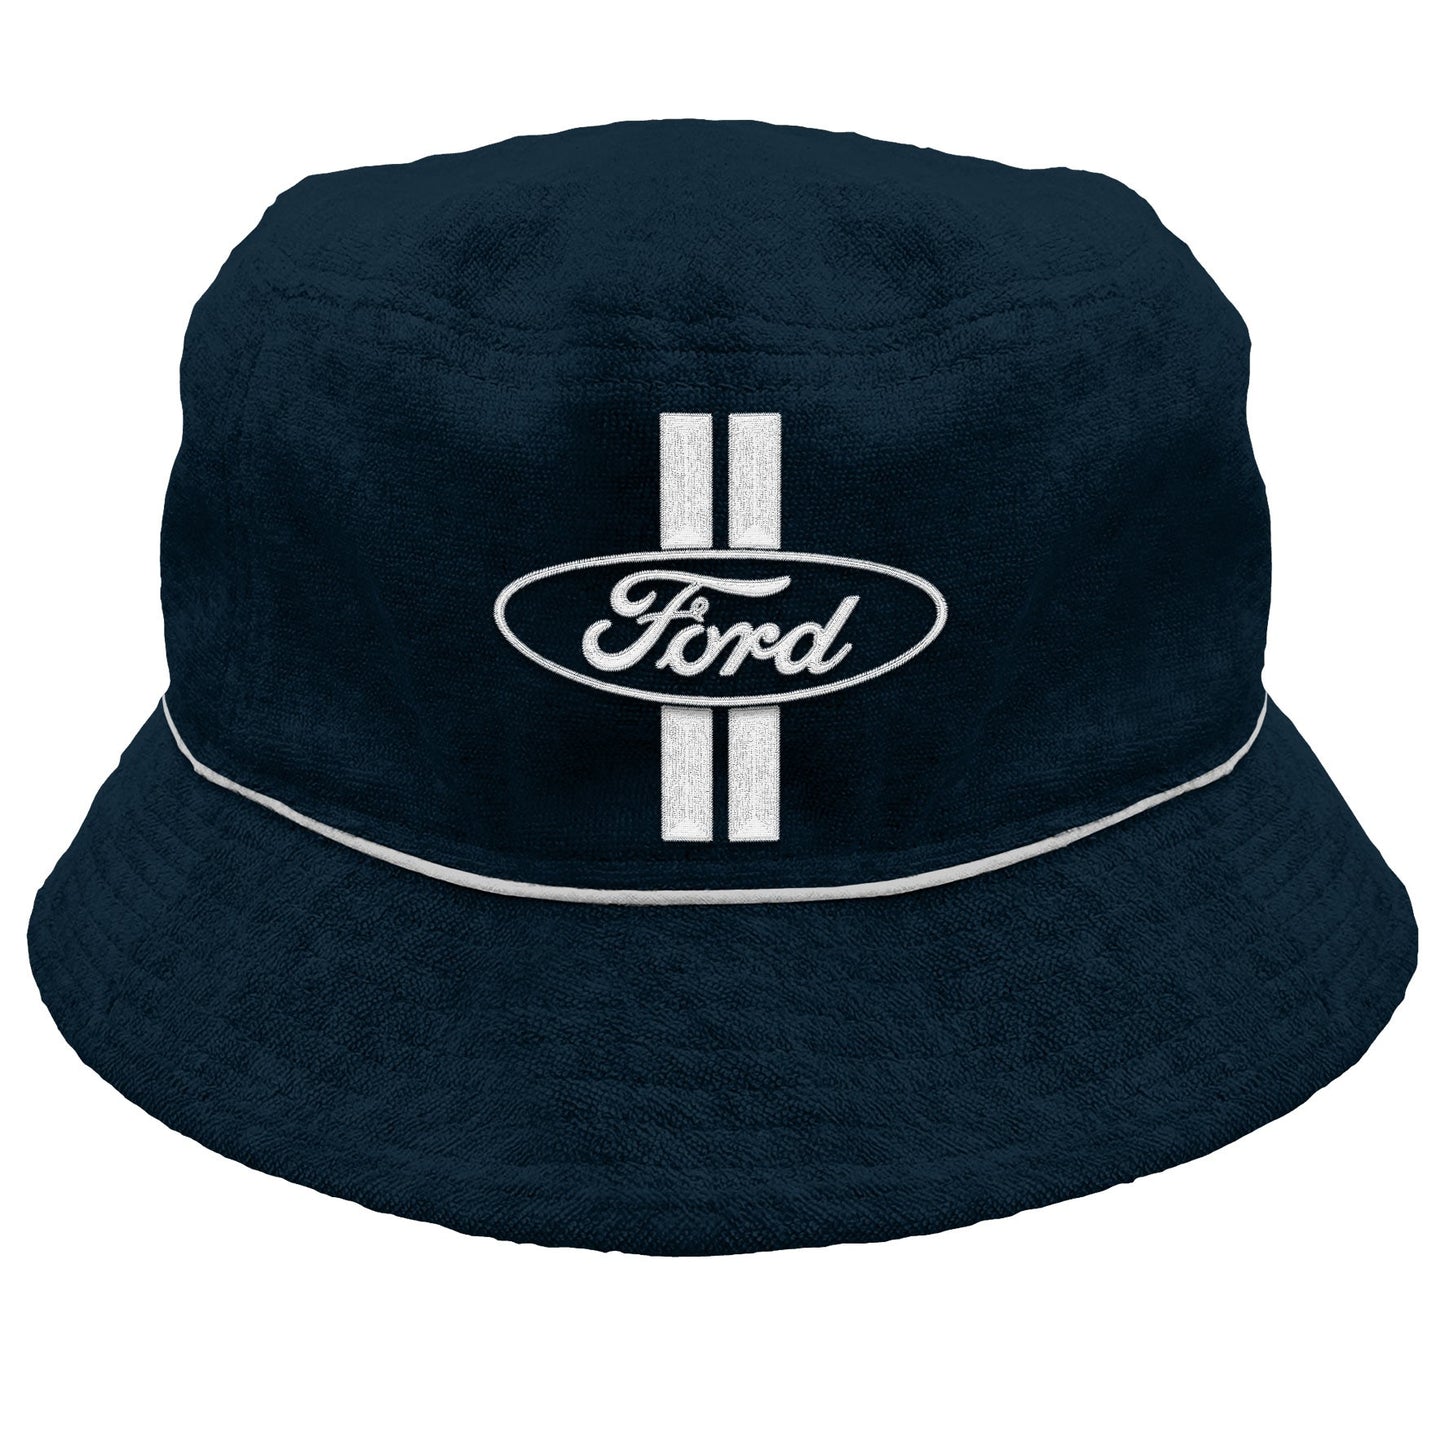 Ford Oval Embroidered Logo Bucket Hat Cap size 58cm